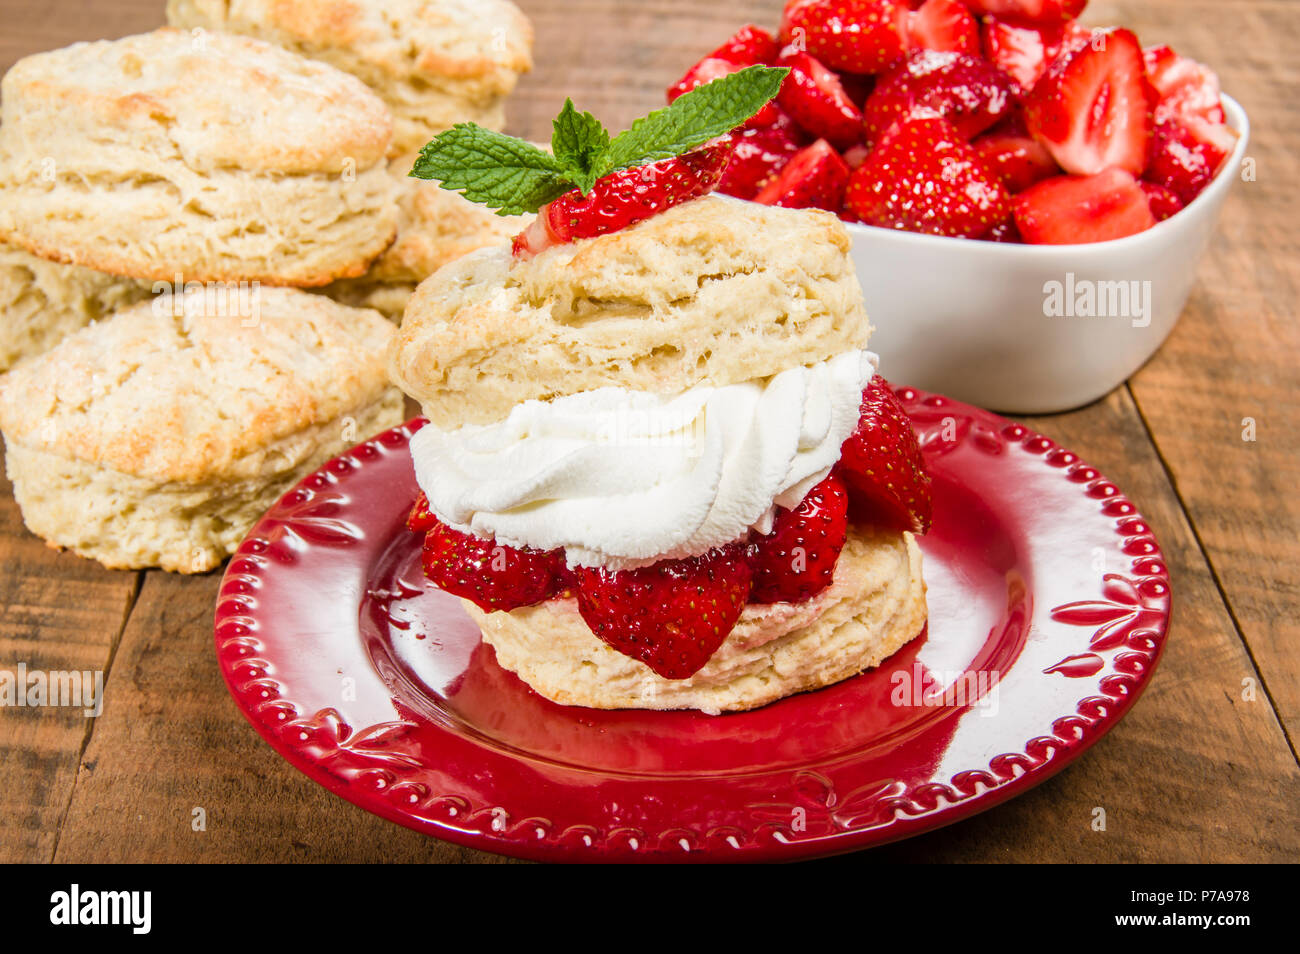 Strawberries and fresh whipped cream on baked biscuit Stock Photo